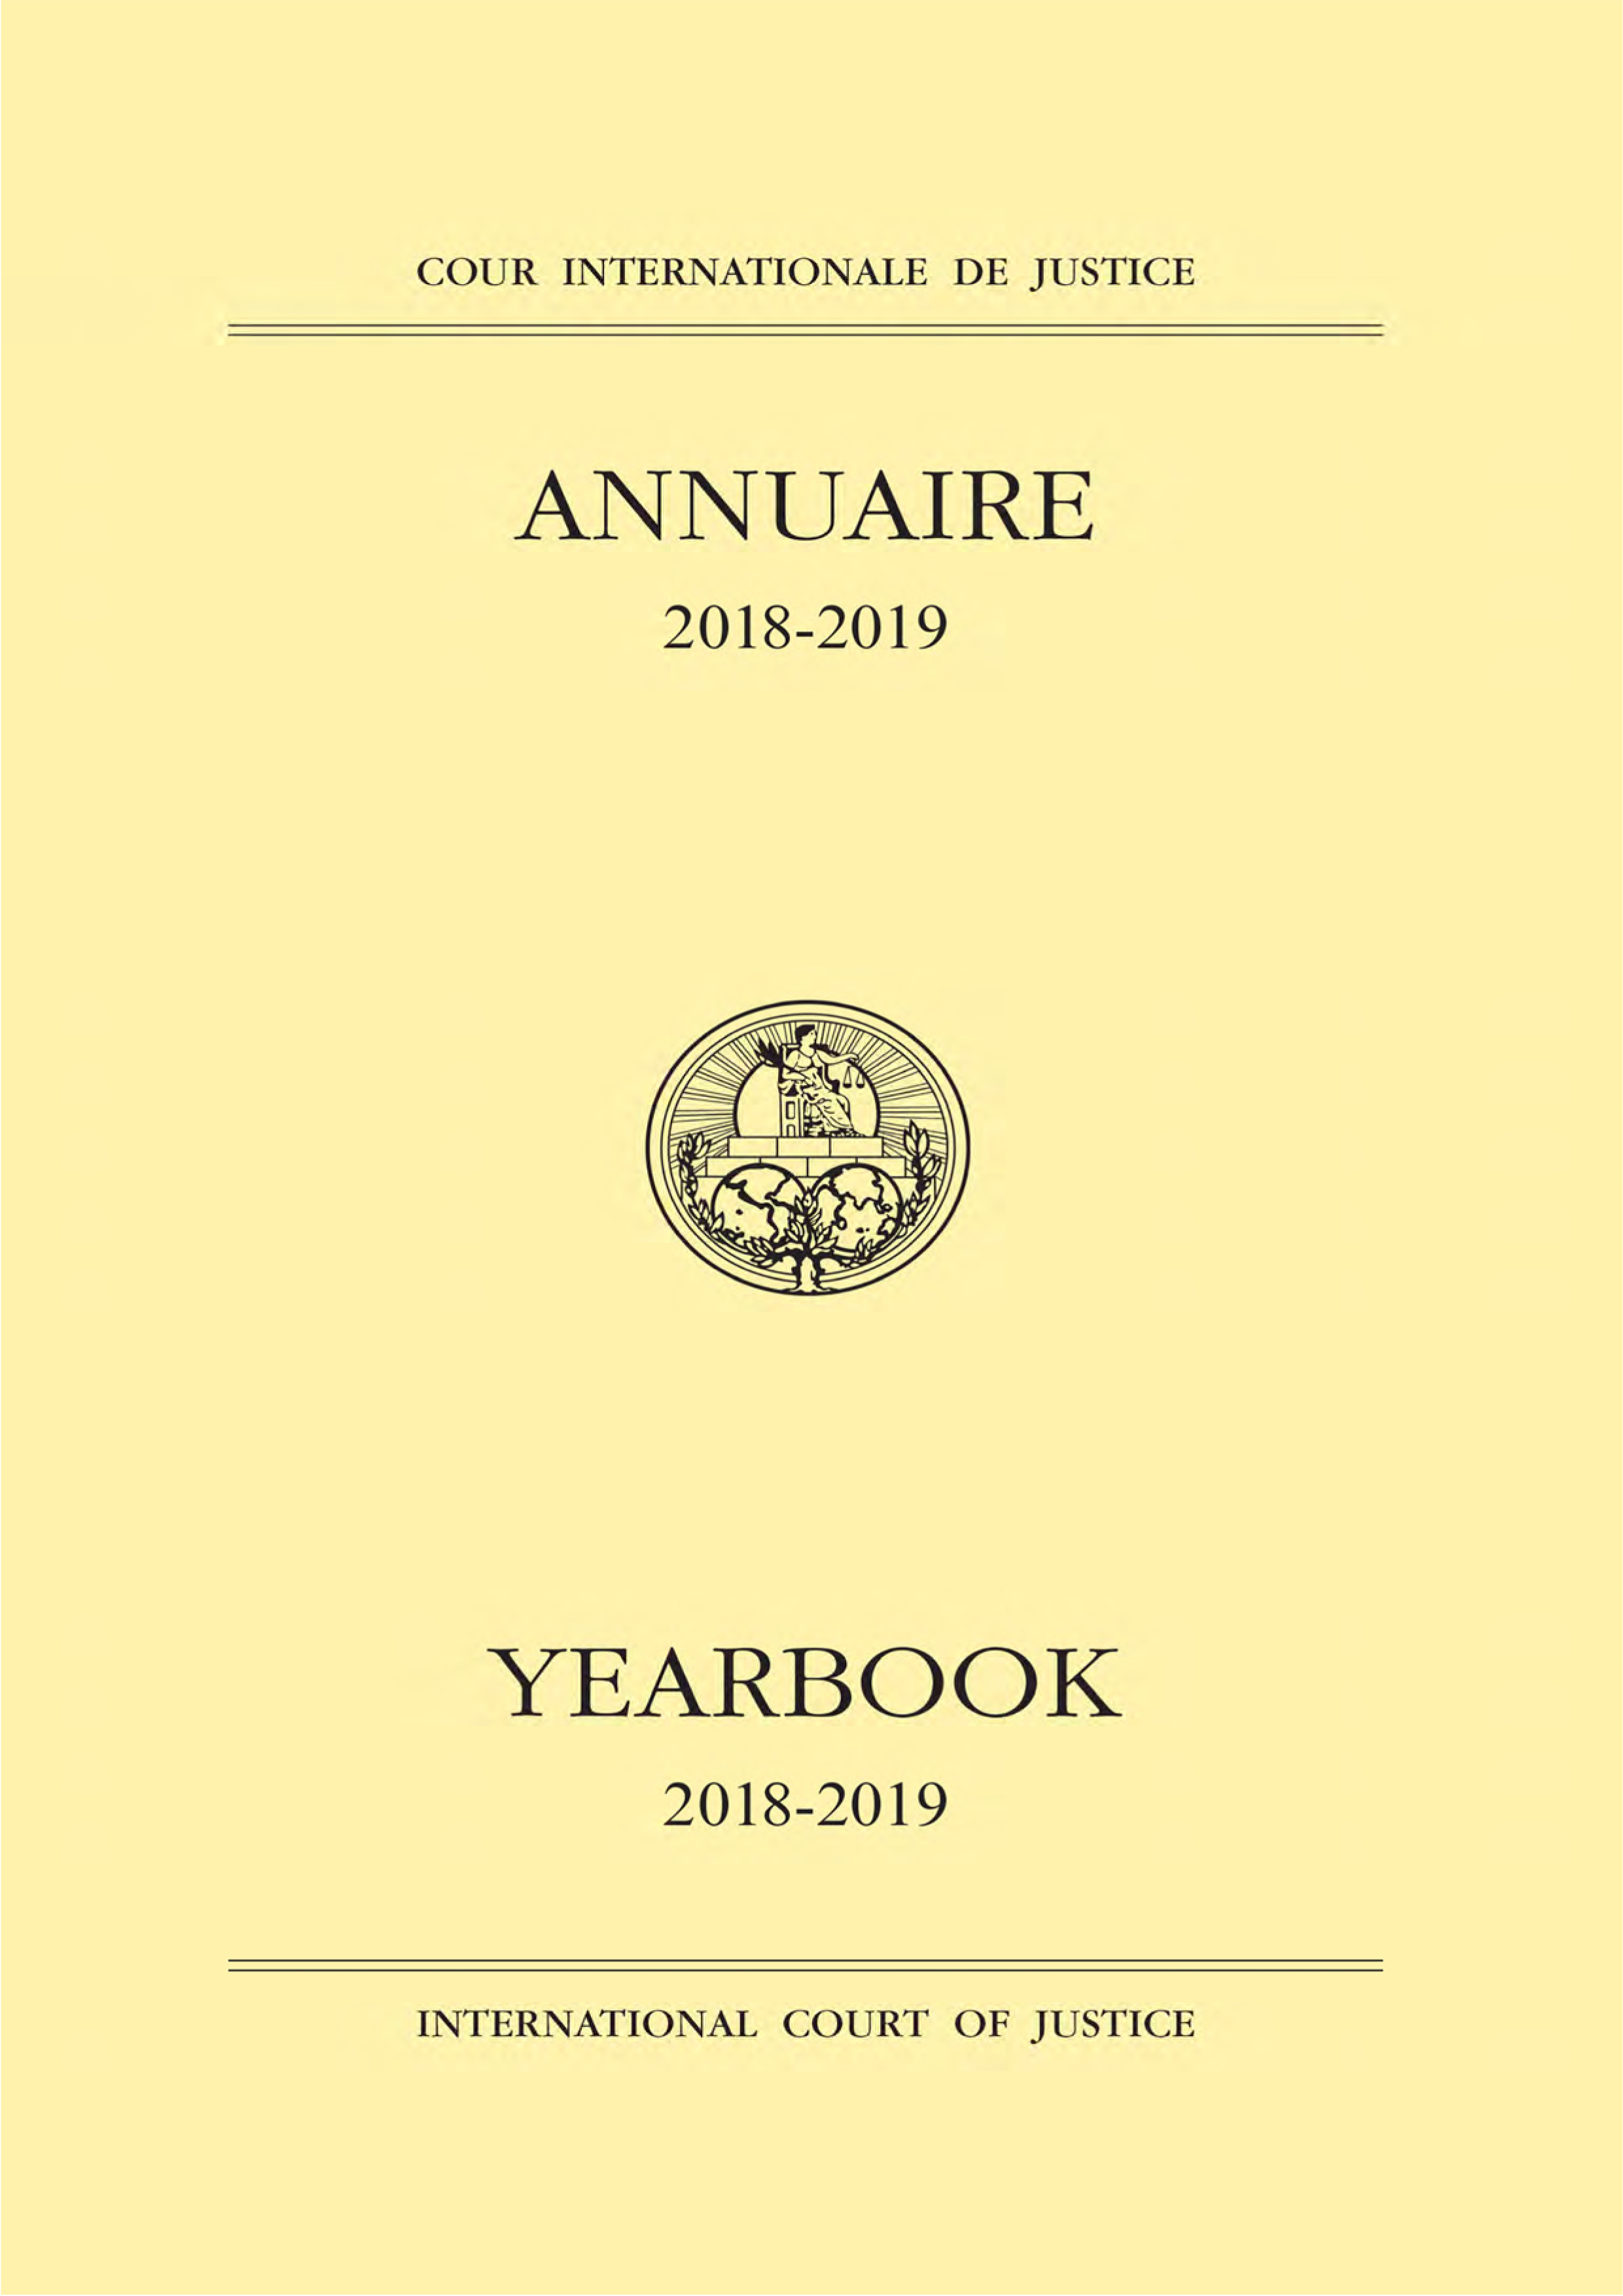 image of Yearbook of the International Court of Justice 2018-2019